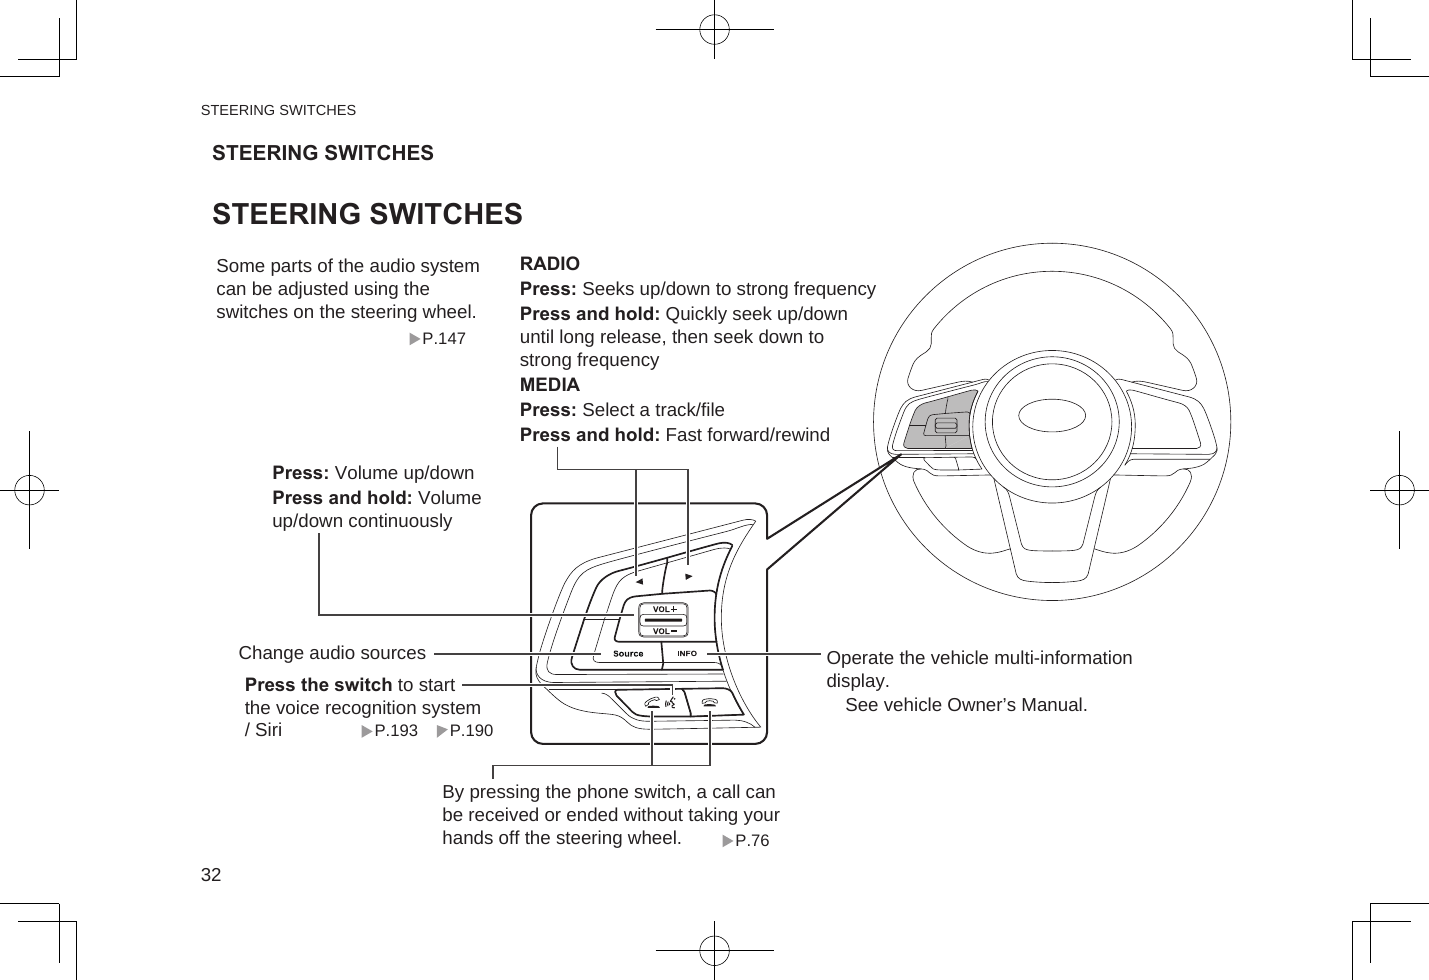 STEERING SWITCHESP.147Press the switch to start the voice recognition system / SiriSome parts of the audio system can be adjusted using the switches on the steering wheel.P.76P.190P.193By pressing the phone switch, a call can be received or ended without taking your hands off the steering wheel.Operate the vehicle multi-information display.　See vehicle Owner’s Manual.Press: Volume up/downPress and hold: Volume up/down continuouslyChange audio sourcesRADIOPress: Seeks up/down to strong frequencyPress and hold: Quickly seek up/down until long release, then seek down to strong frequencyMEDIAPress: Select a track/filePress and hold: Fast forward/rewindSTEERING SWITCHESSTEERING SWITCHESSTEERING SWITCHES32